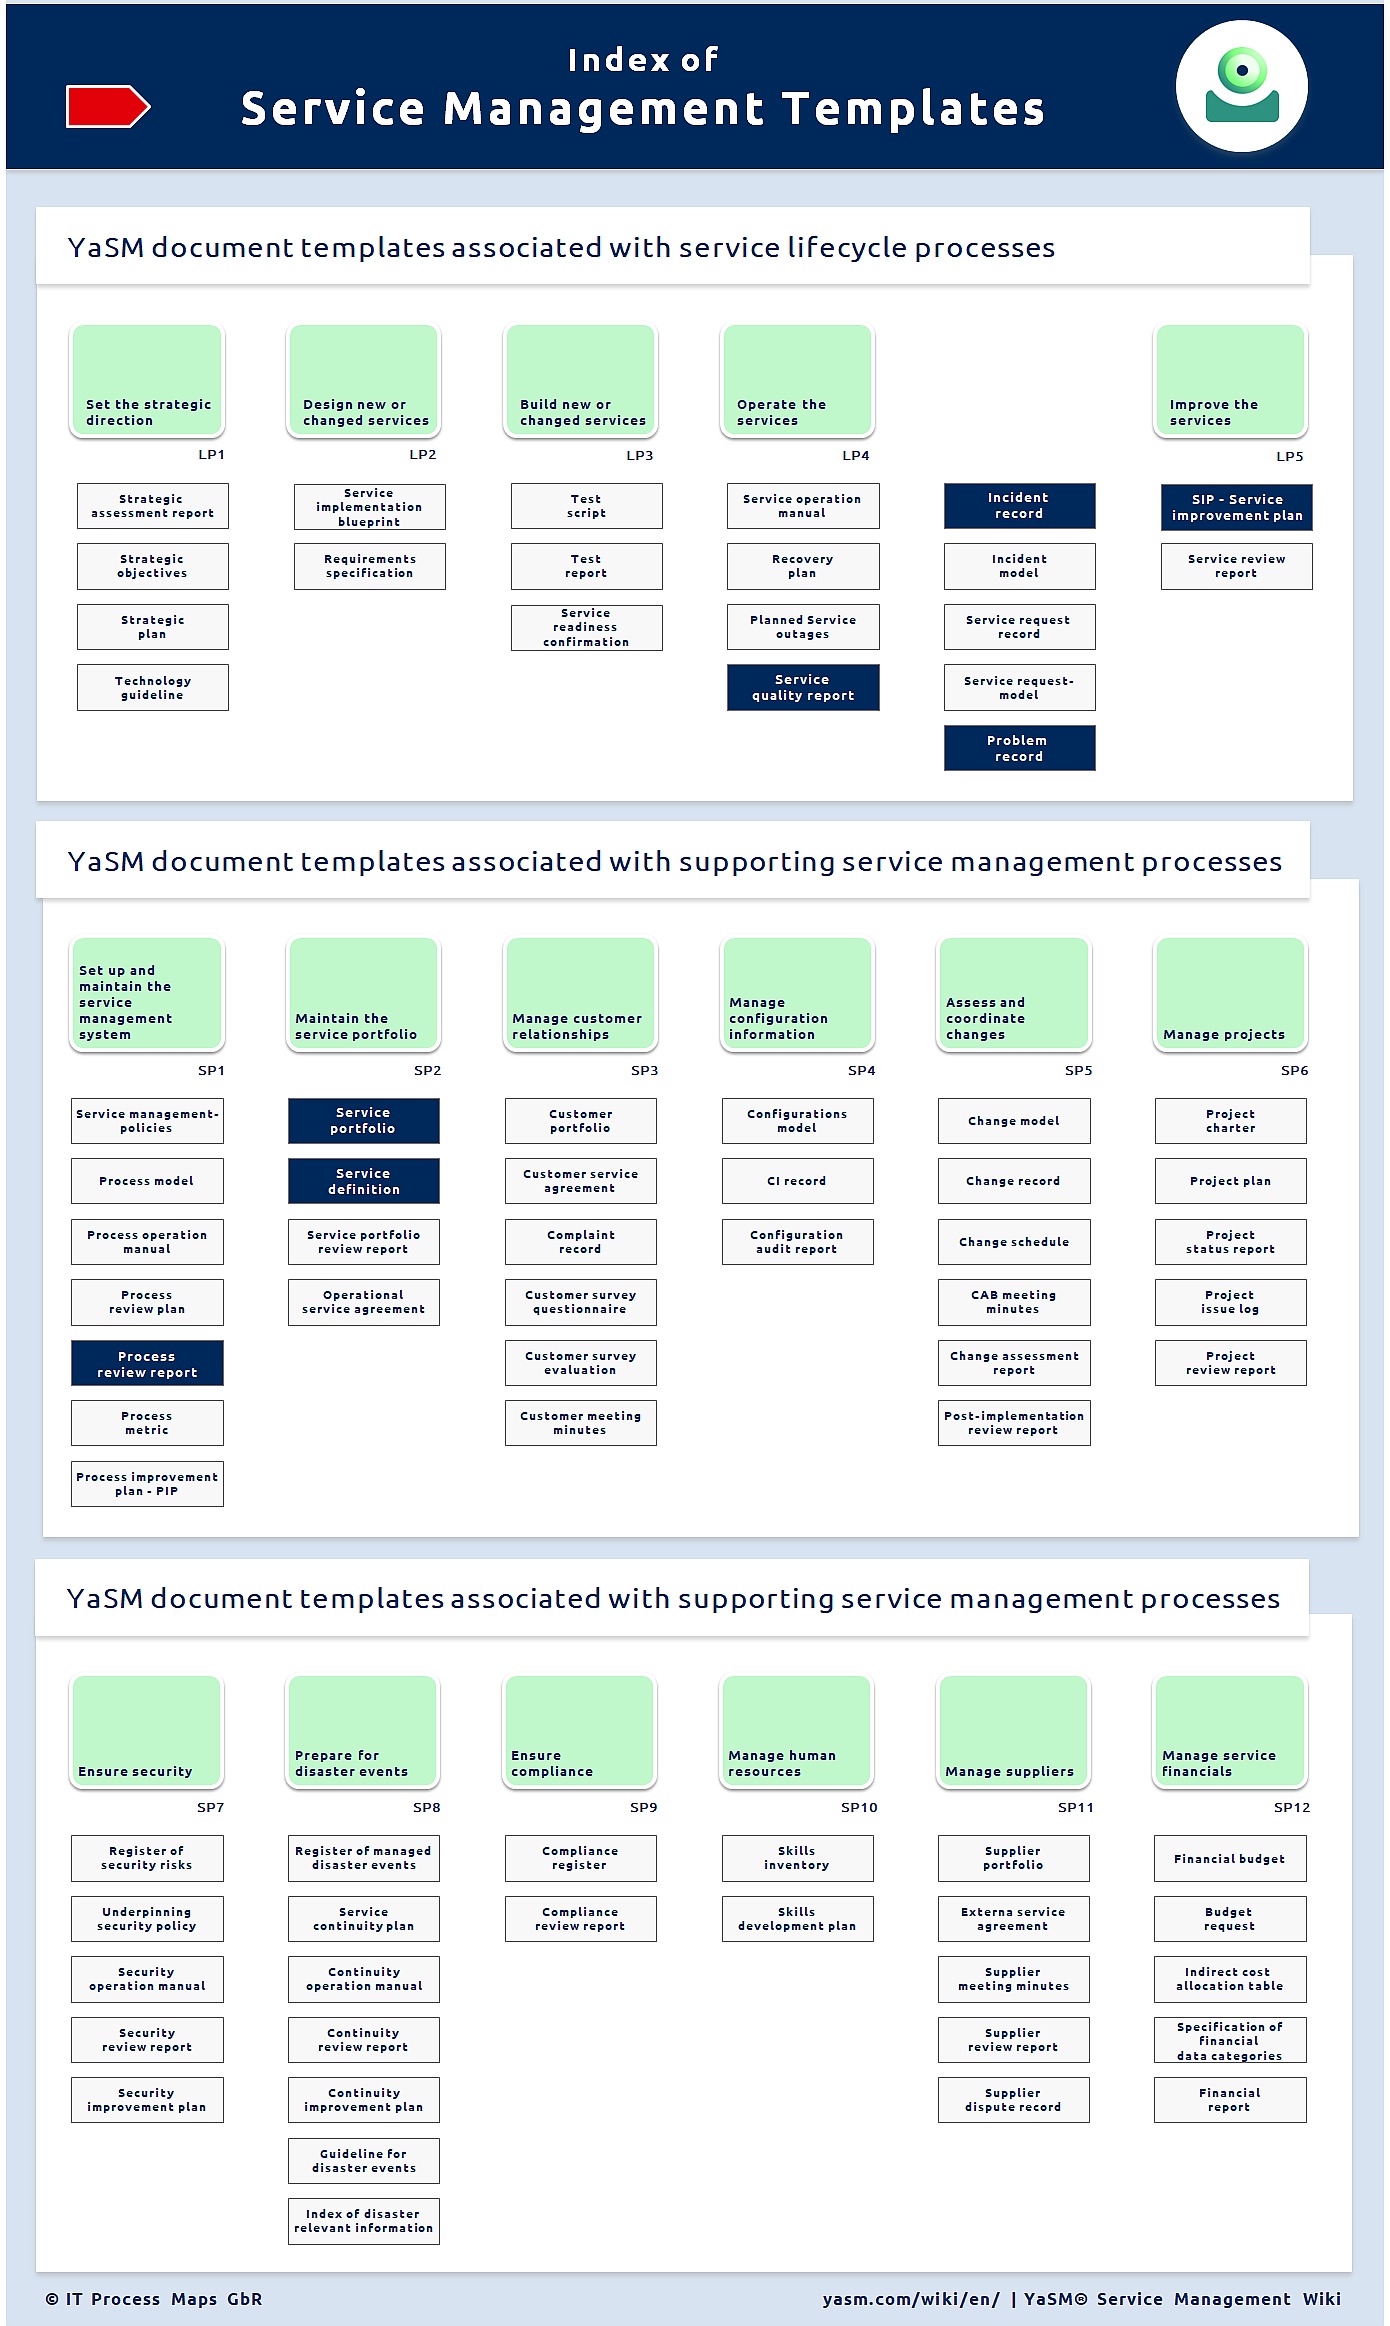 Index of service management checklists, document templates and policies in the YaSM model.